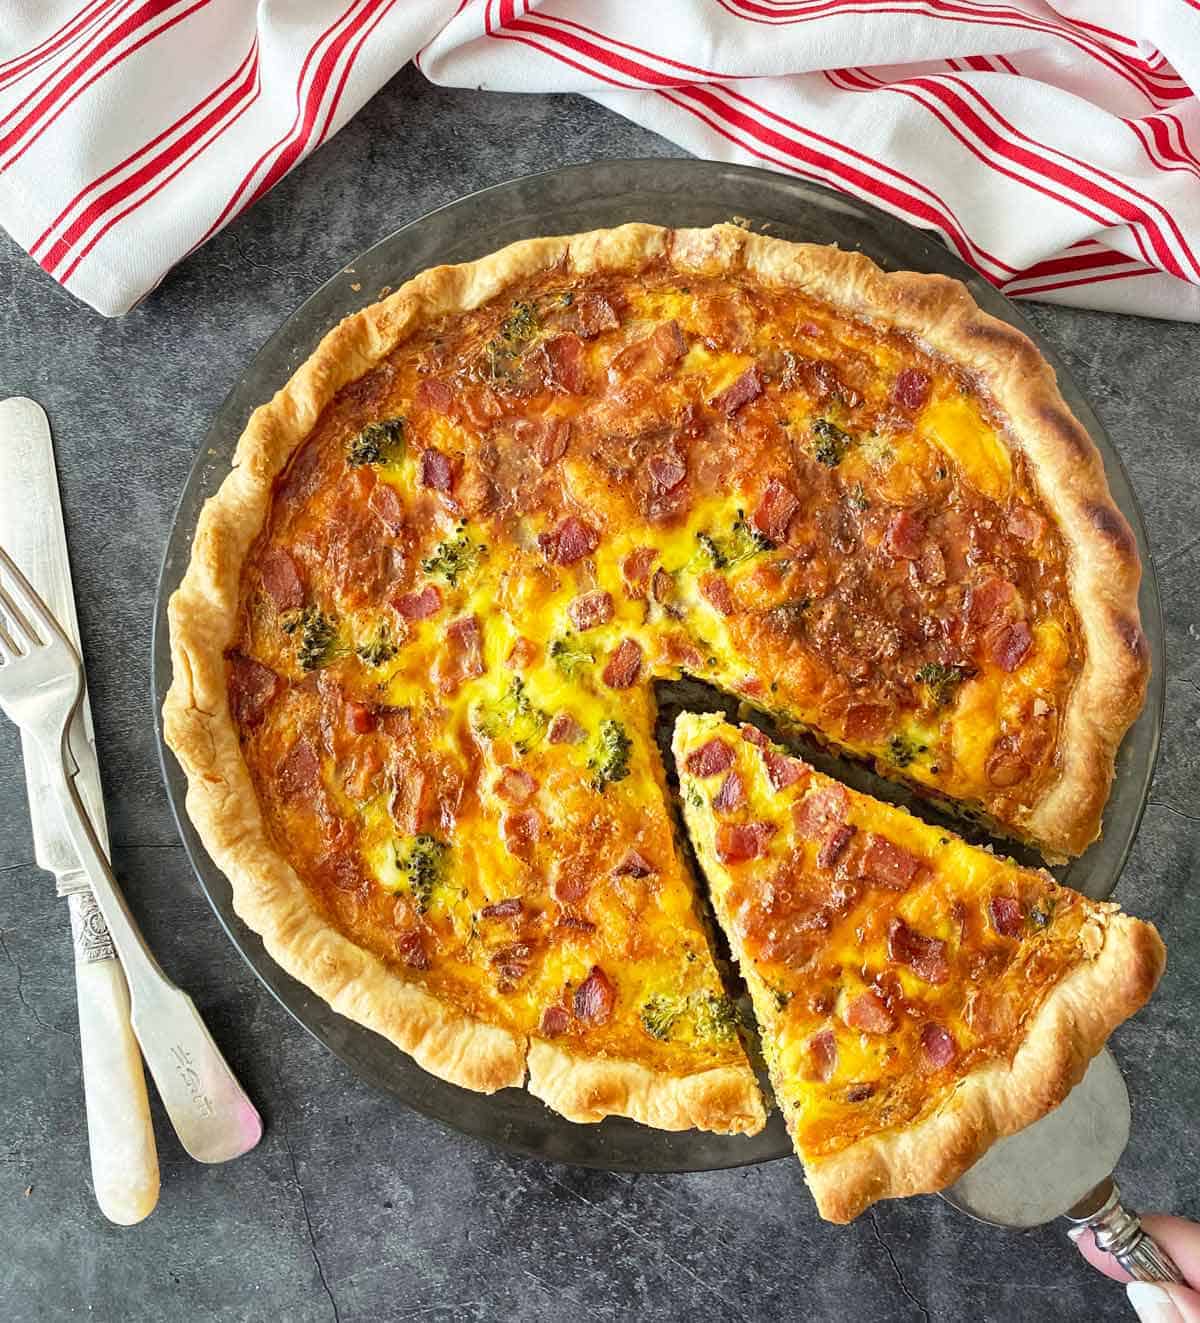 Lifting a slice of broccoli quiche with bacon from the pan to serve.